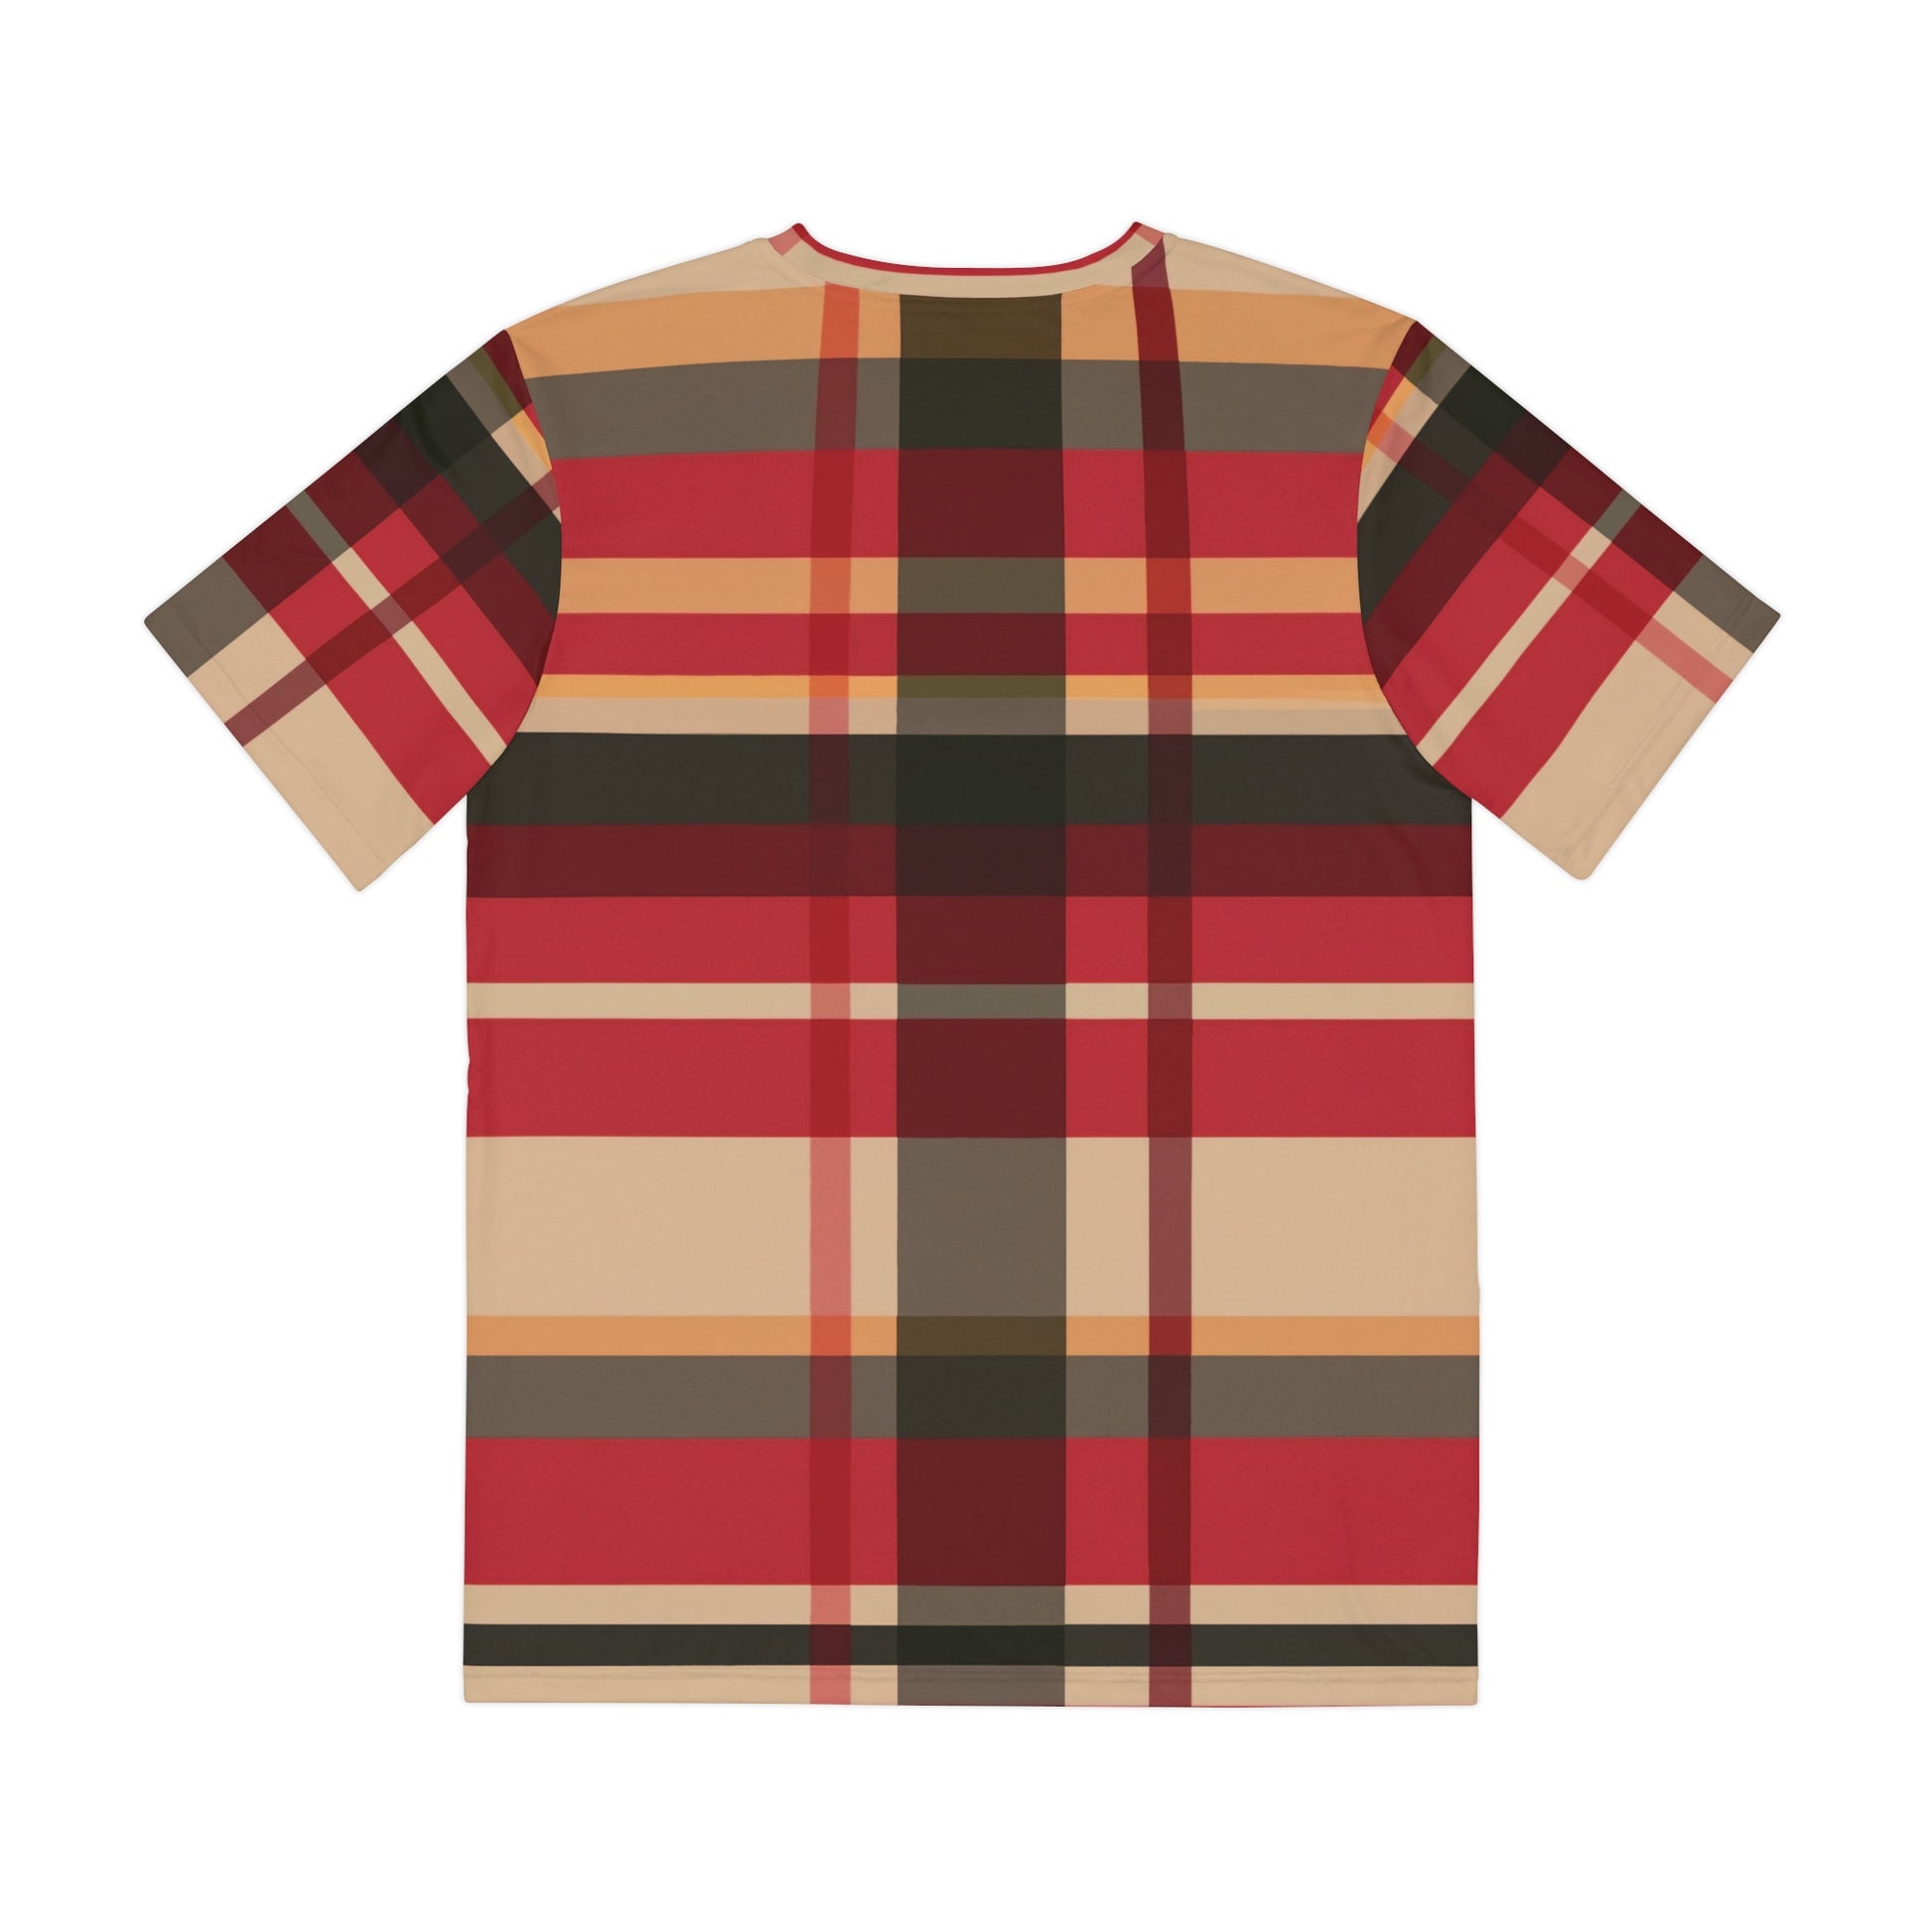 Back side of the McCloud Mist Tartan Crewneck Pullover Short-Sleeved All-Over Print Shirt red black and beige plaid pattern